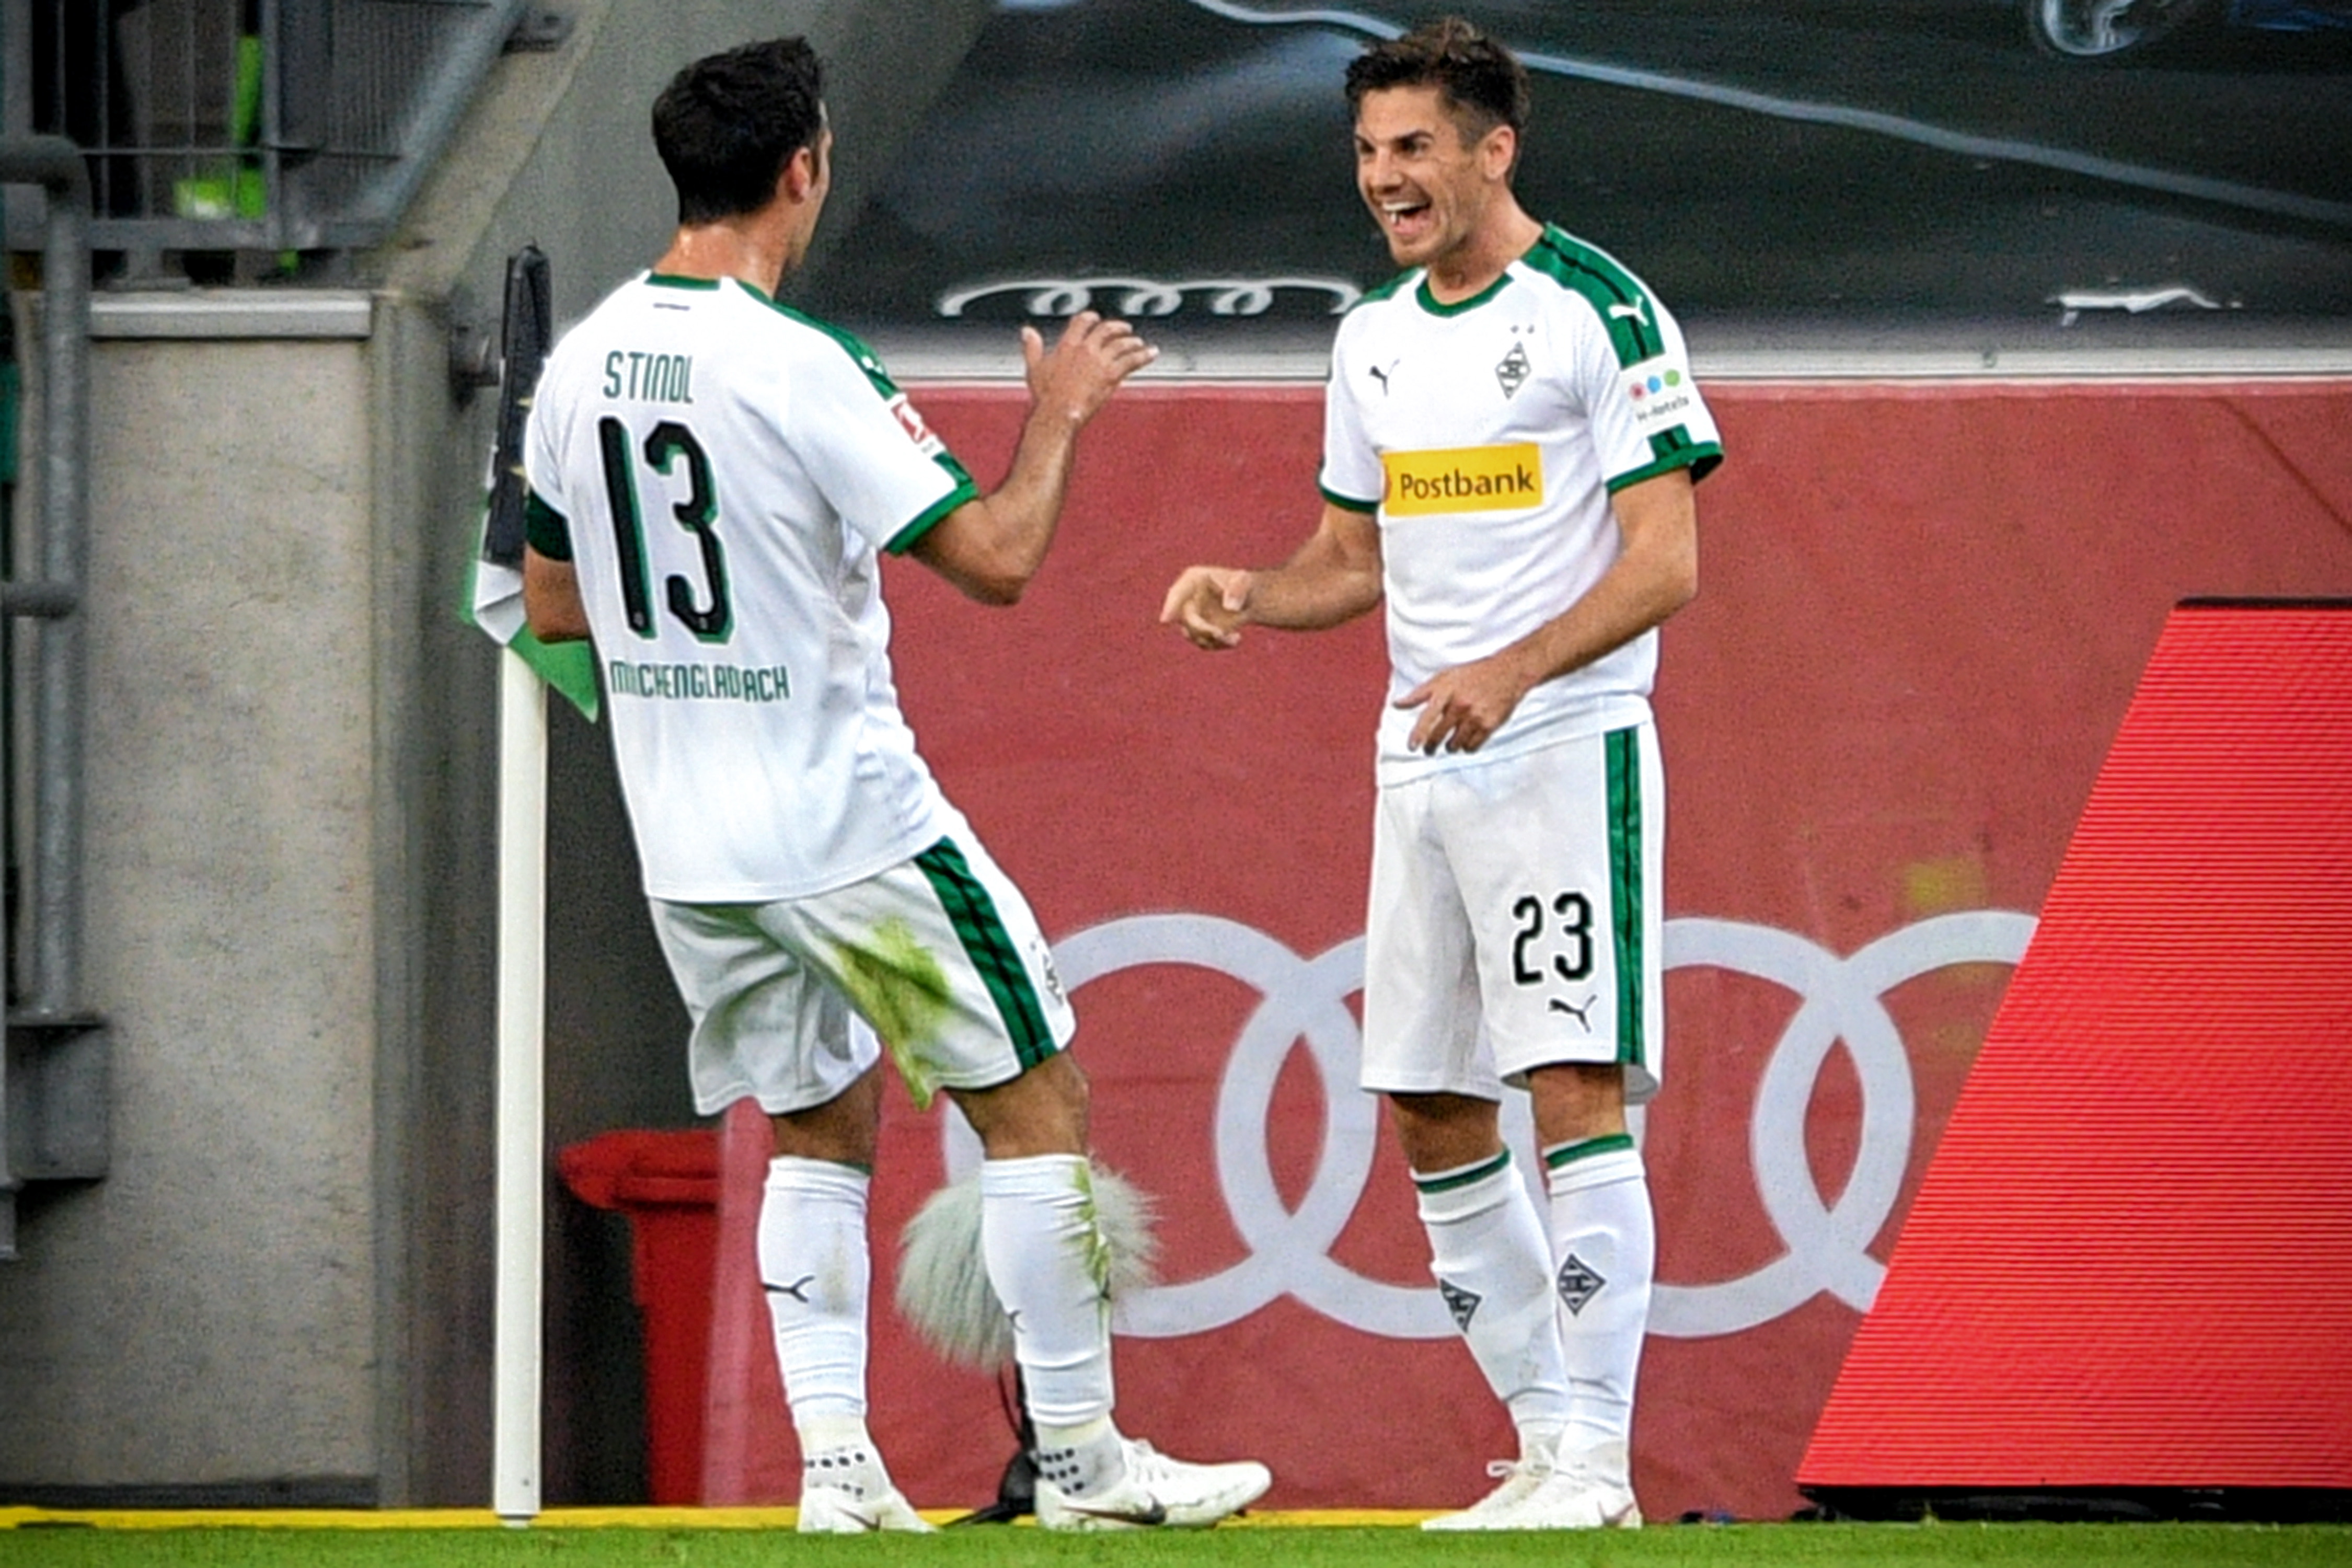 epa07109728 Moenchengladbach's Jonas Hofmann (R) celebrates with his teammates Lars Stindl (L) after scoring the 1-0 lead during the German Bundesliga soccer match between Borussia Moenchengladbach and FSV Mainz 05 in Moenchengladbach, Germany, 21 October 2018.  EPA/SASCHA STEINBACH CONDITIONS - ATTENTION: The DFL regulations prohibit any use of photographs as image sequences and/or quasi-video.